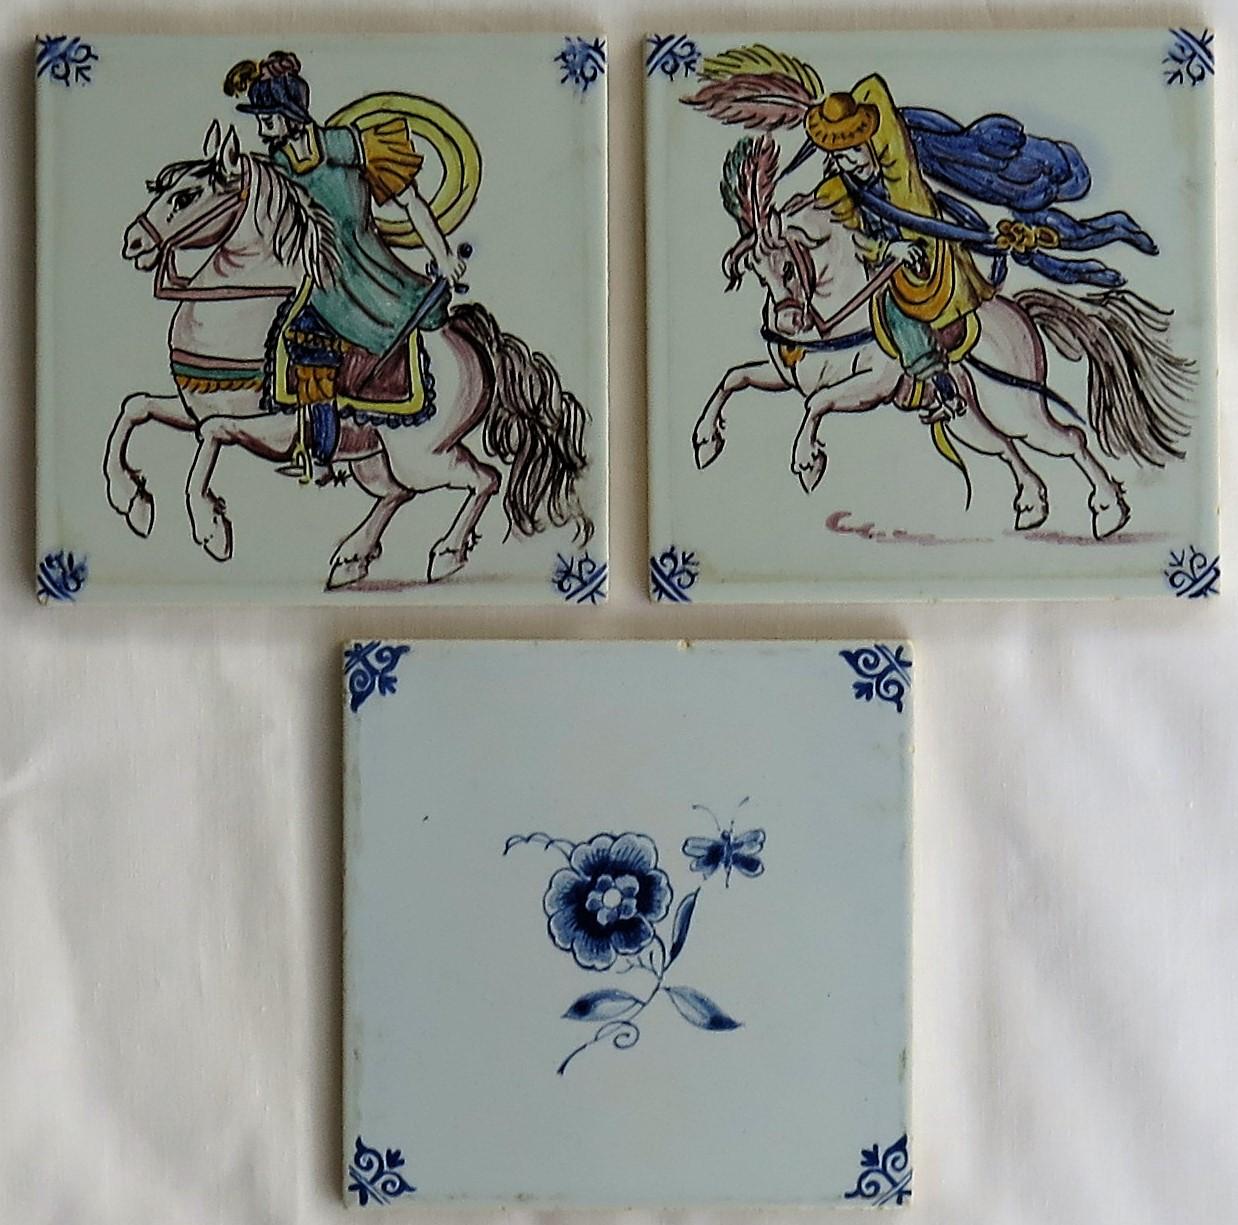 These are three attractive, hand painted, Dutch (Netherlands), delft ceramic wall tiles, dating to the early / mid-20th century, circa 1950s

All tiles are nominally 5 inches square and 5/16 inches thick. 

The tiles all look to be hand painted,